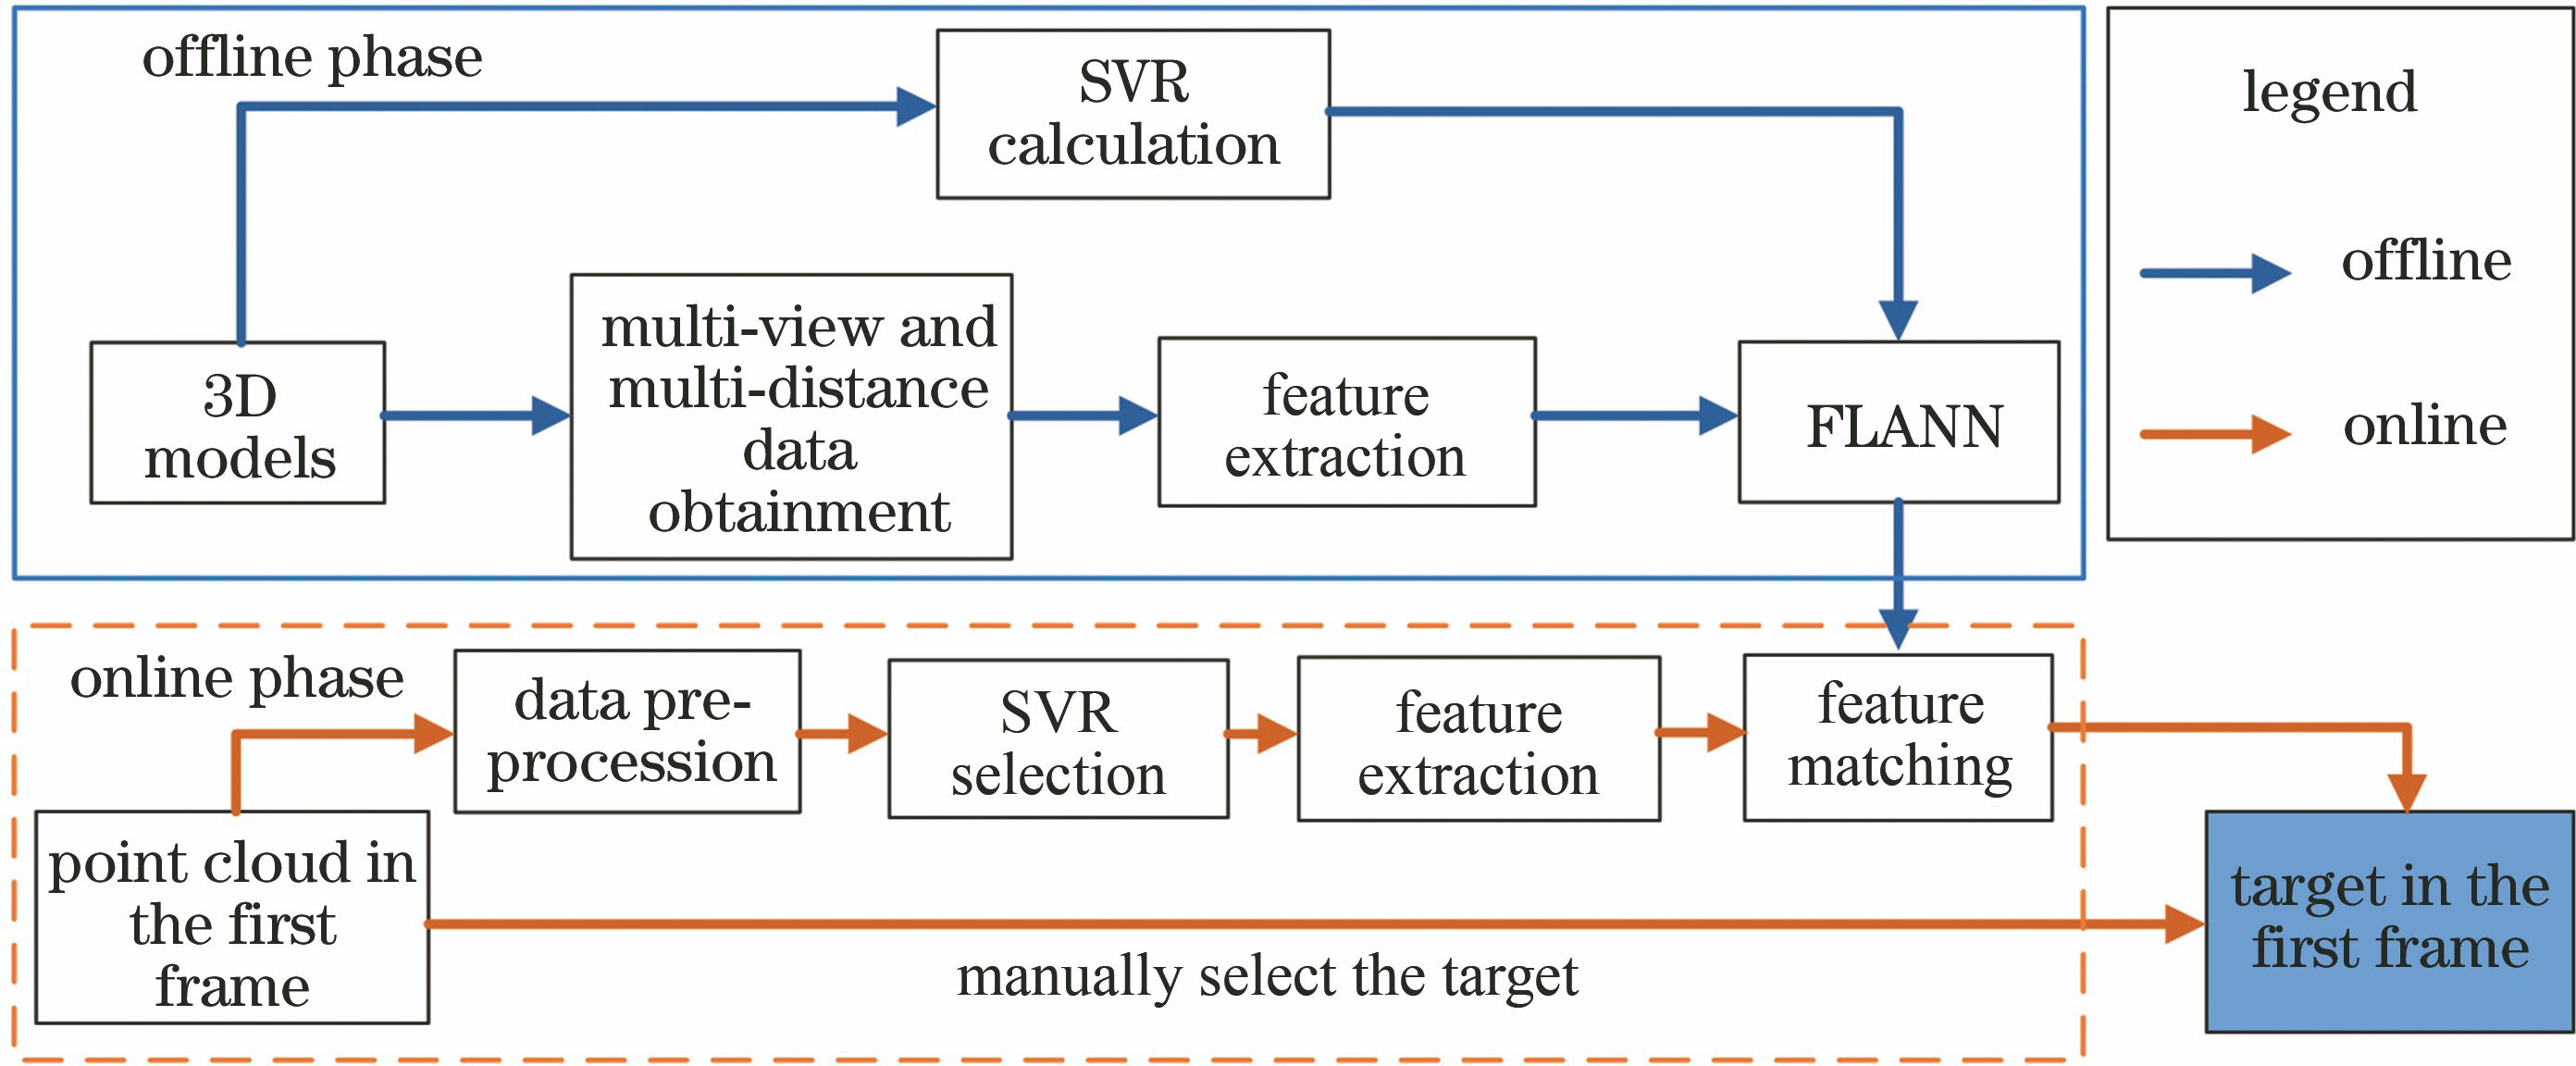 Point cloud target recognition process based on SVR selection